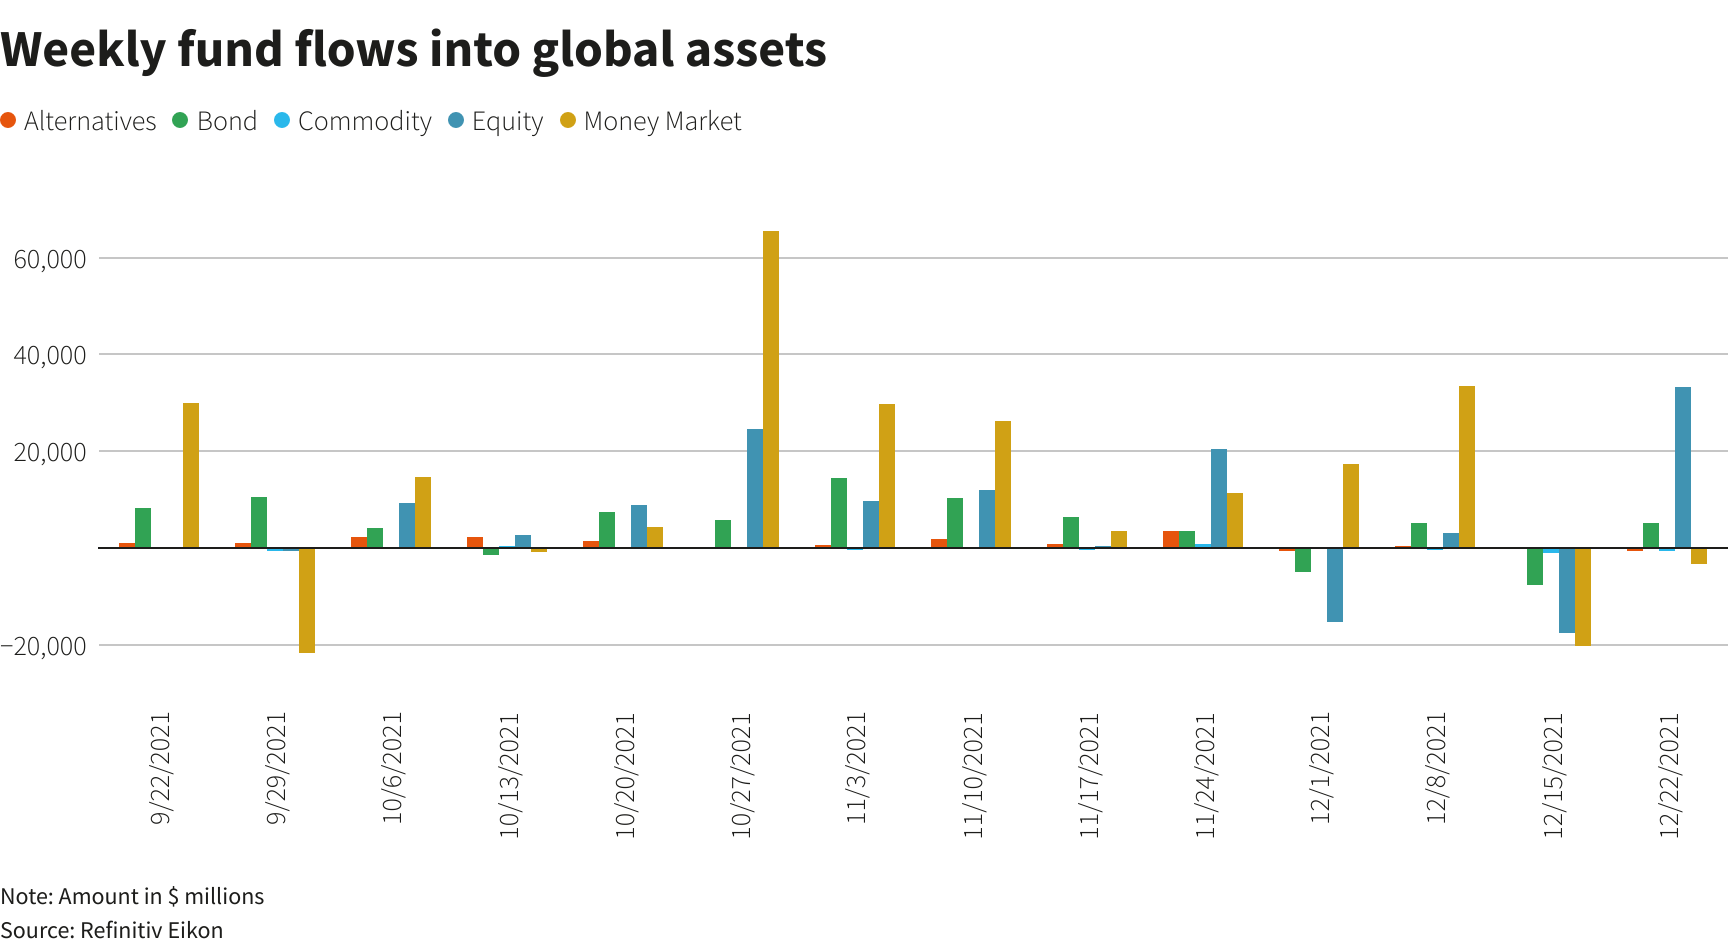 Weekly fund flows into global assets